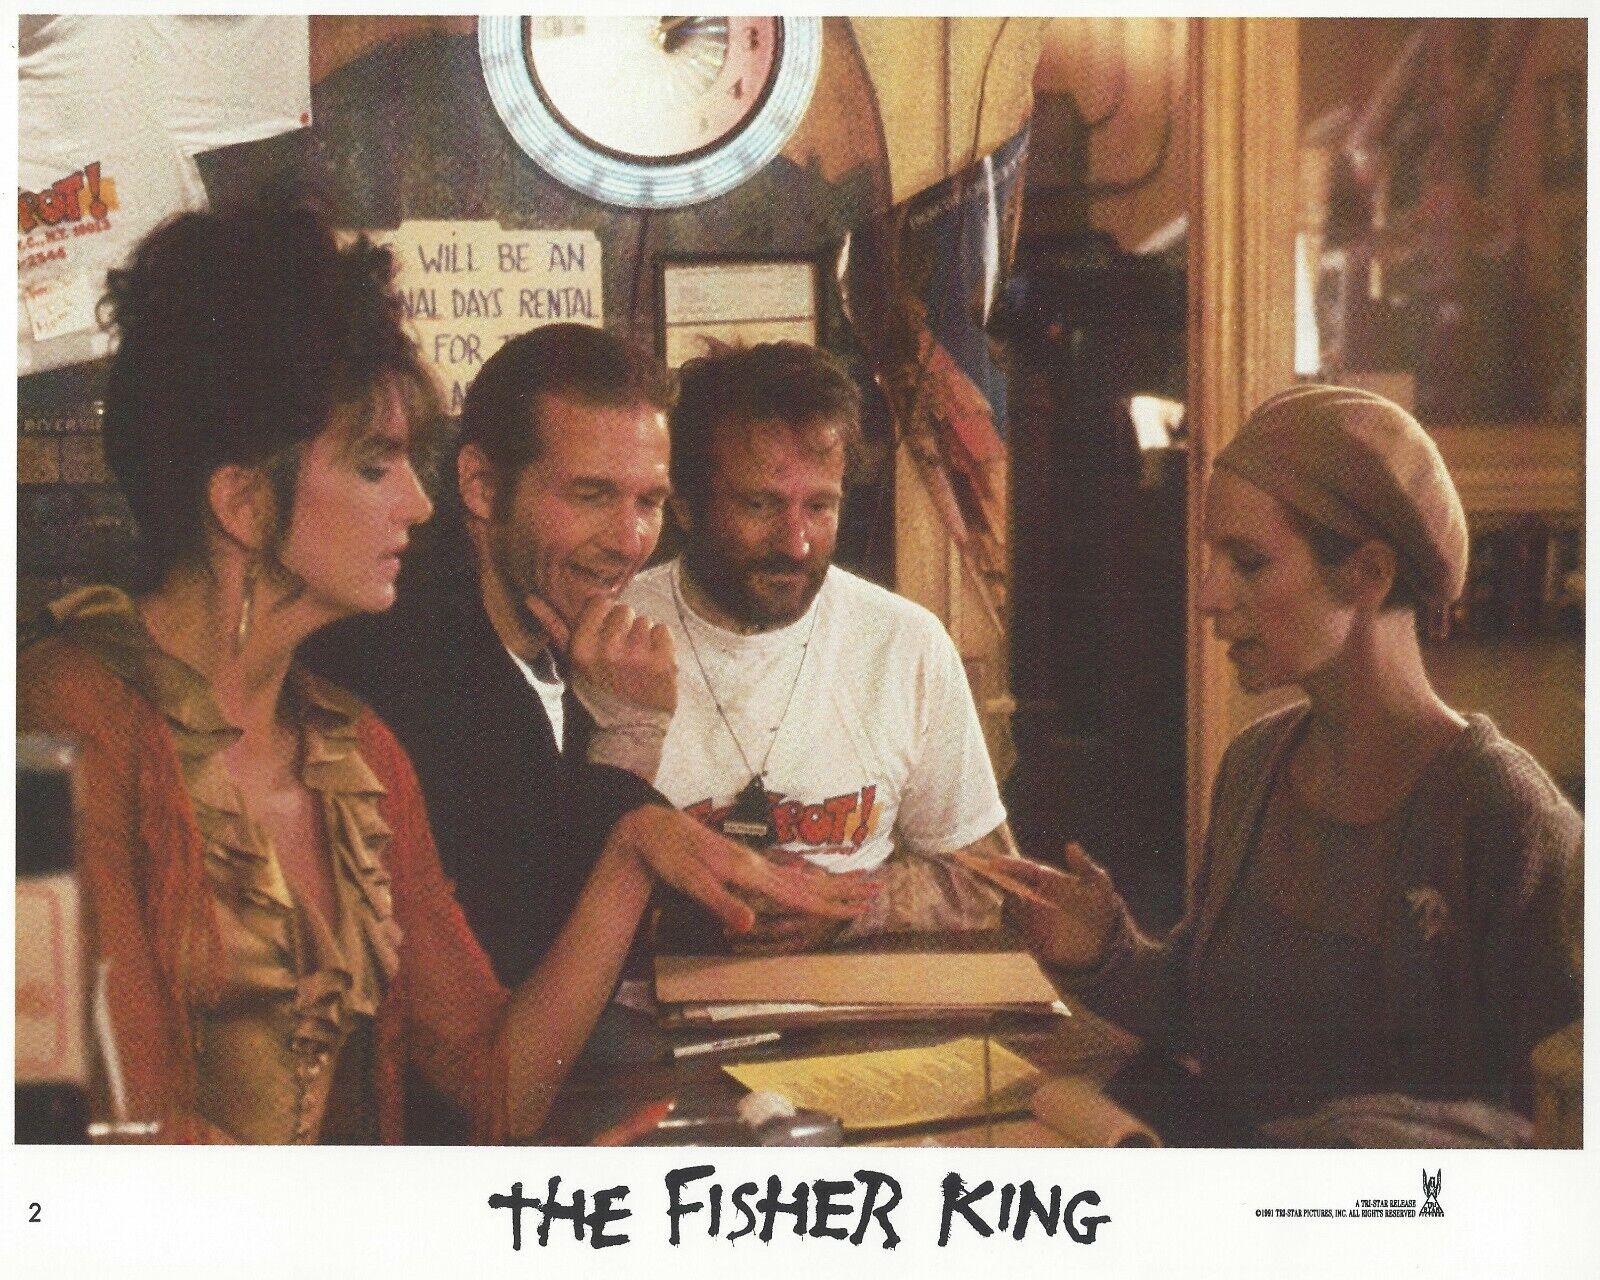 The Fisher King Original 8x10 Lobby Card Poster Photo Poster painting 1991 #2 Williams Bridges